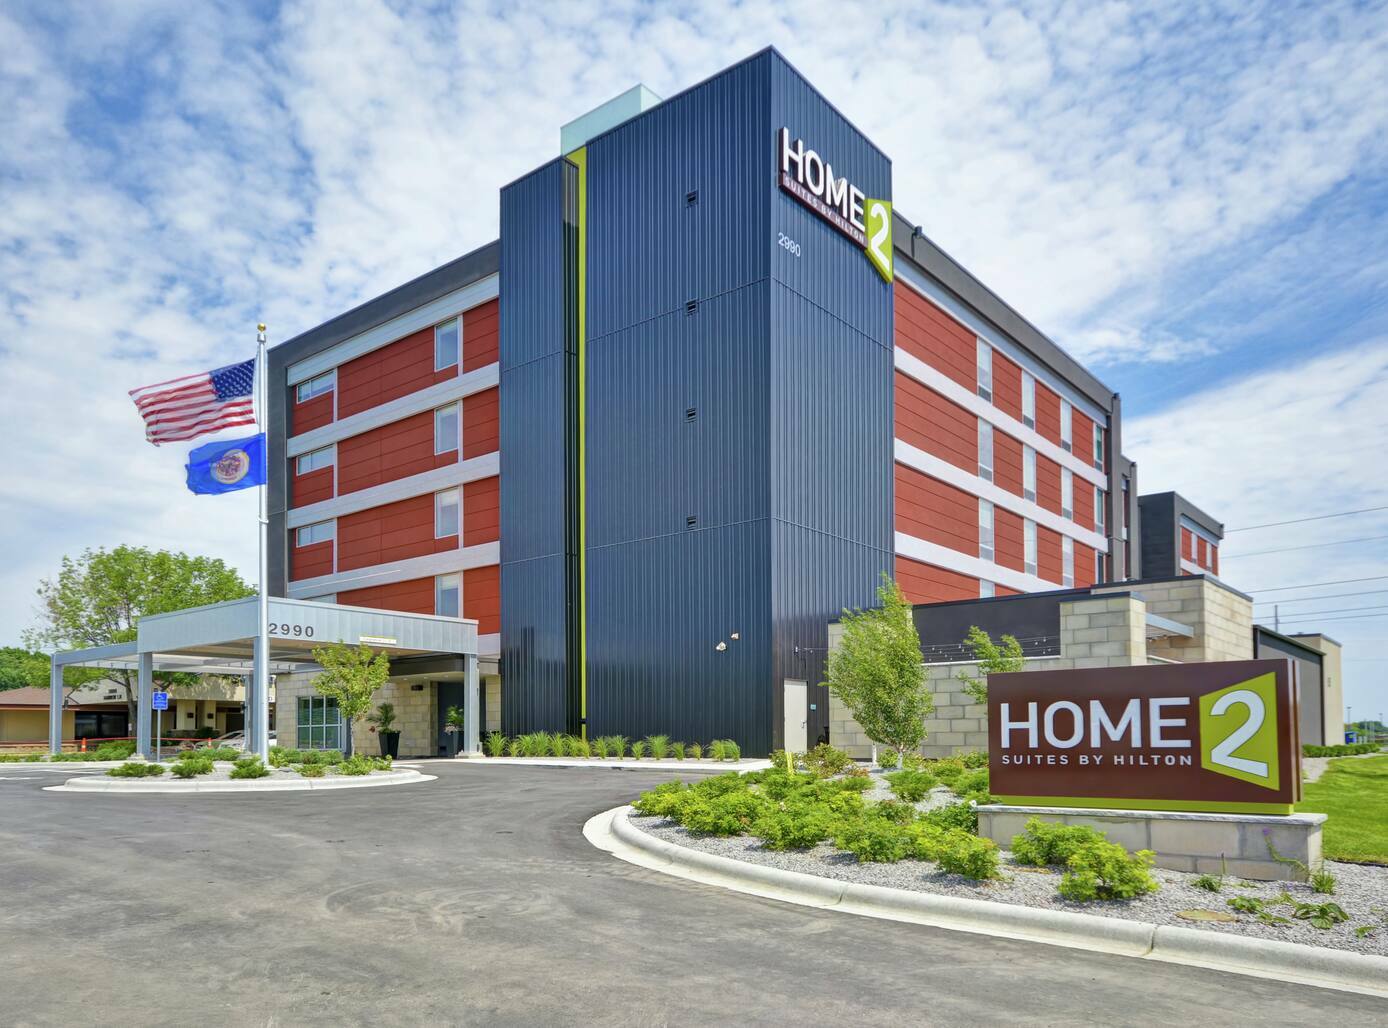 Photo of Home2 Suites by Hilton Plymouth Minneapolis, Plymouth, MN